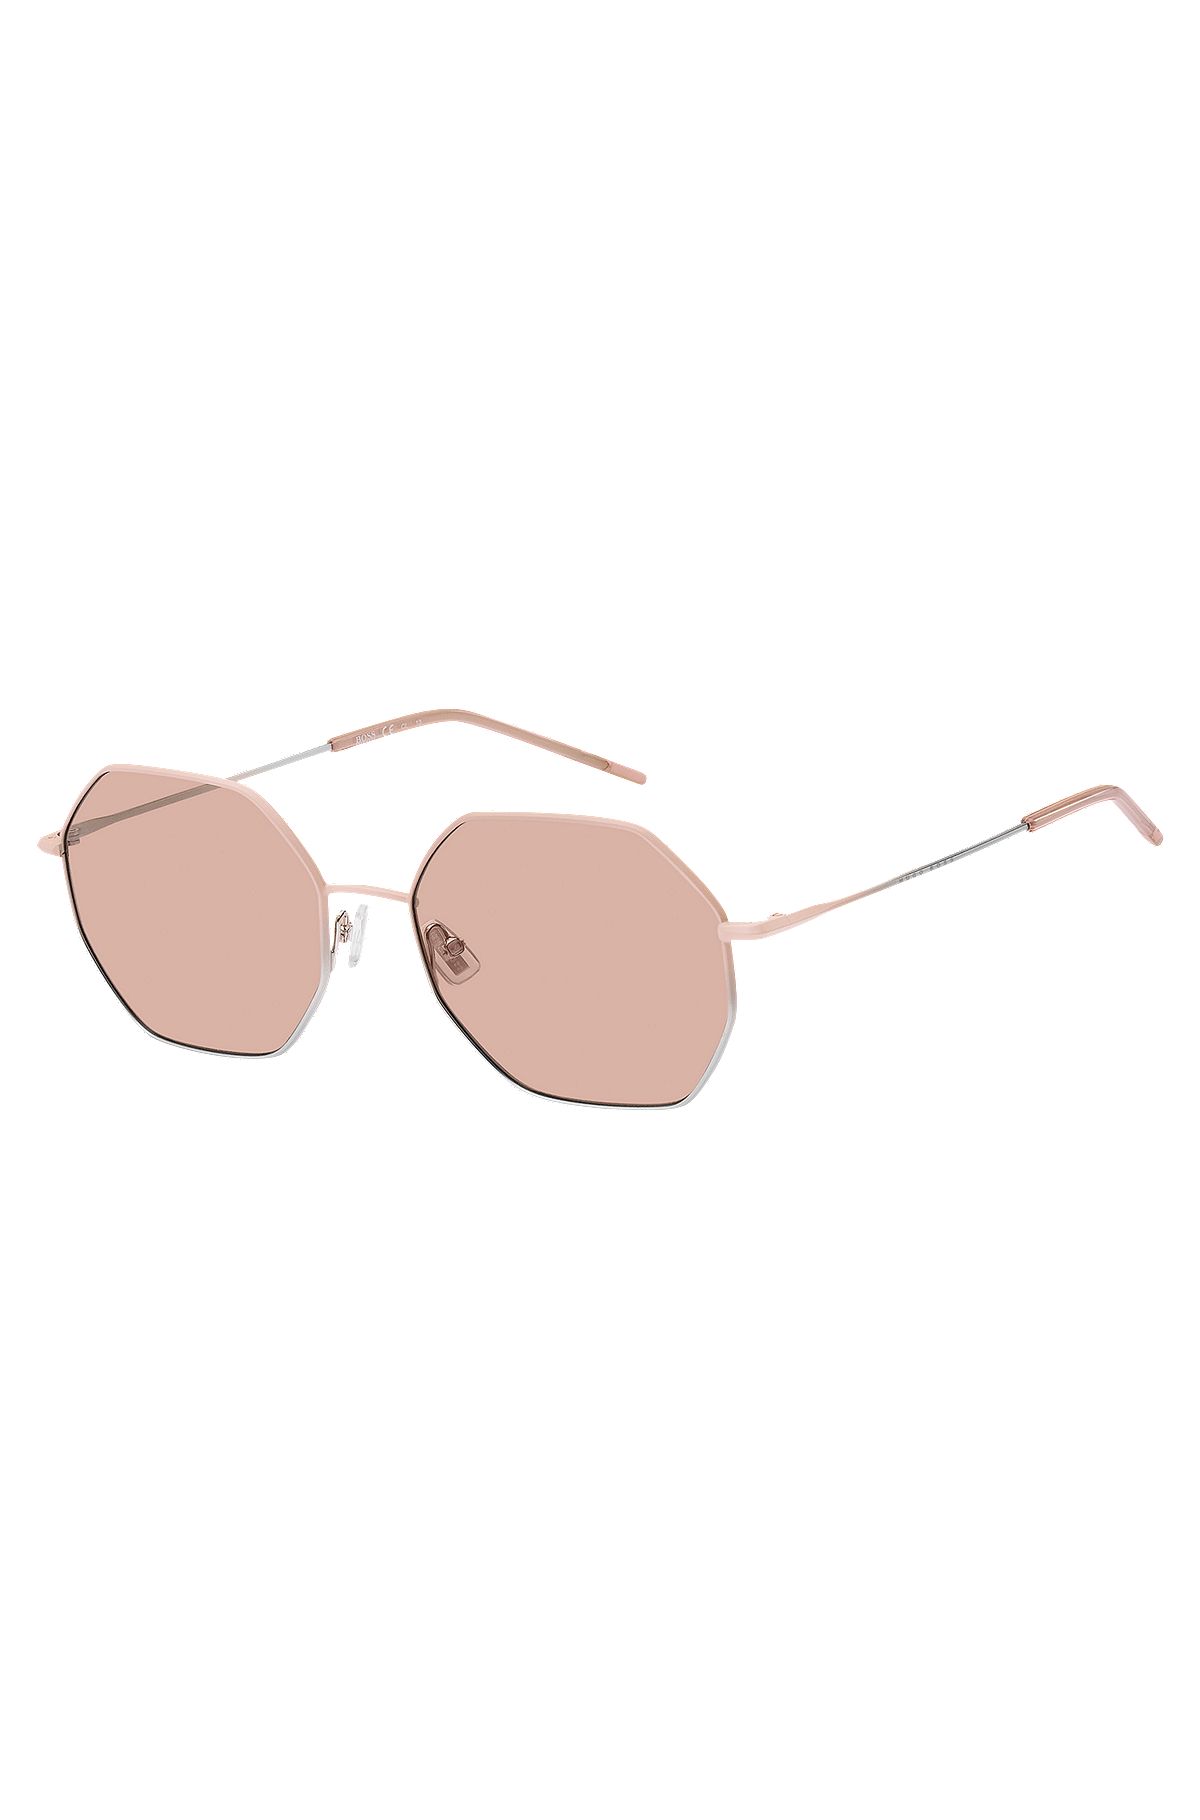 Tubular-temple sunglasses with pink-silver gradients, Pink